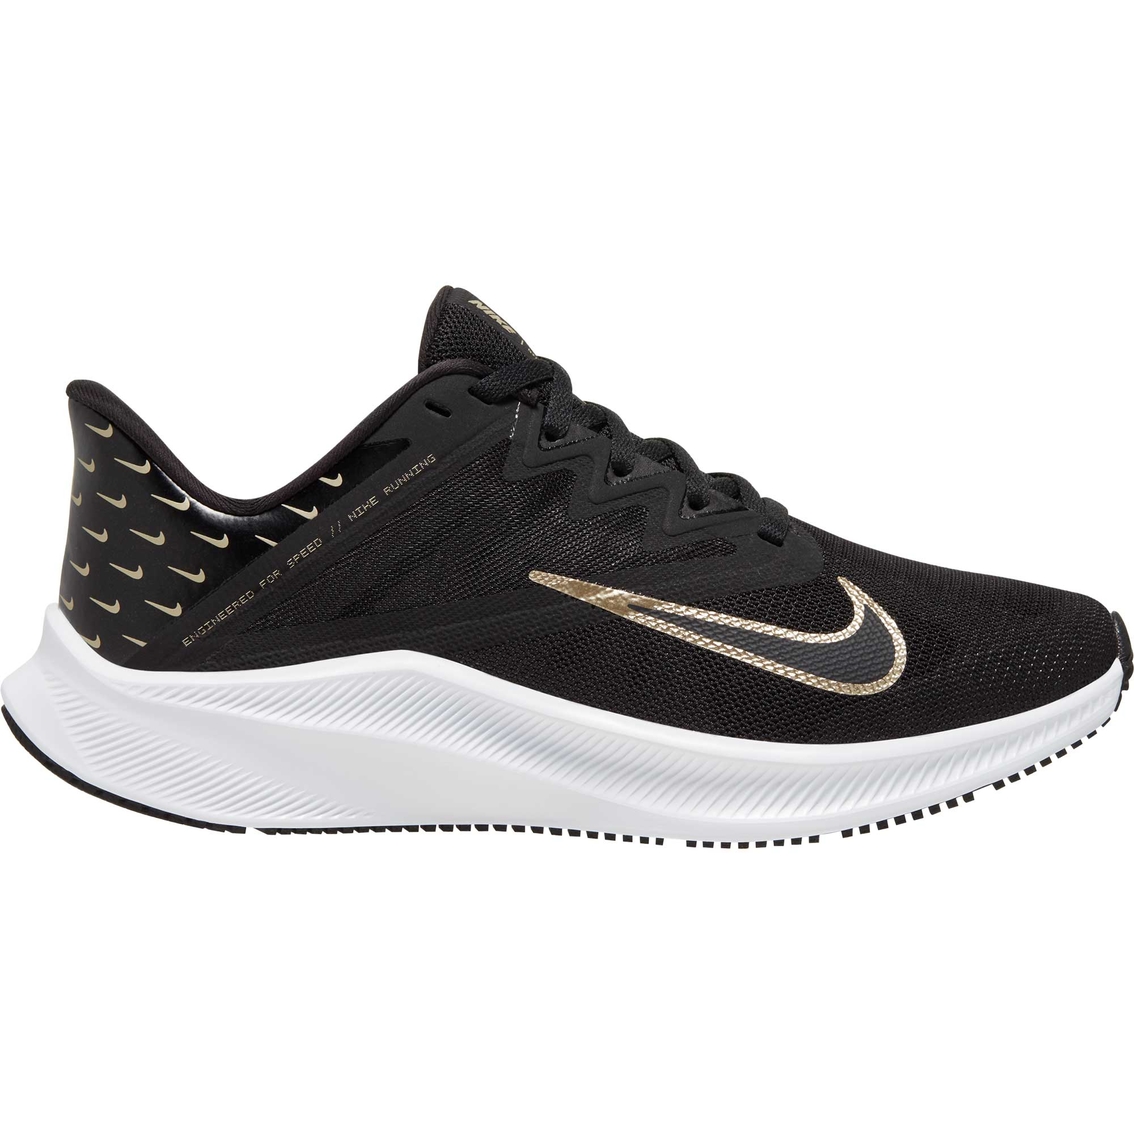 Nike Women's Quest 3 Premium Running Shoes | Sneakers | Back To School ...